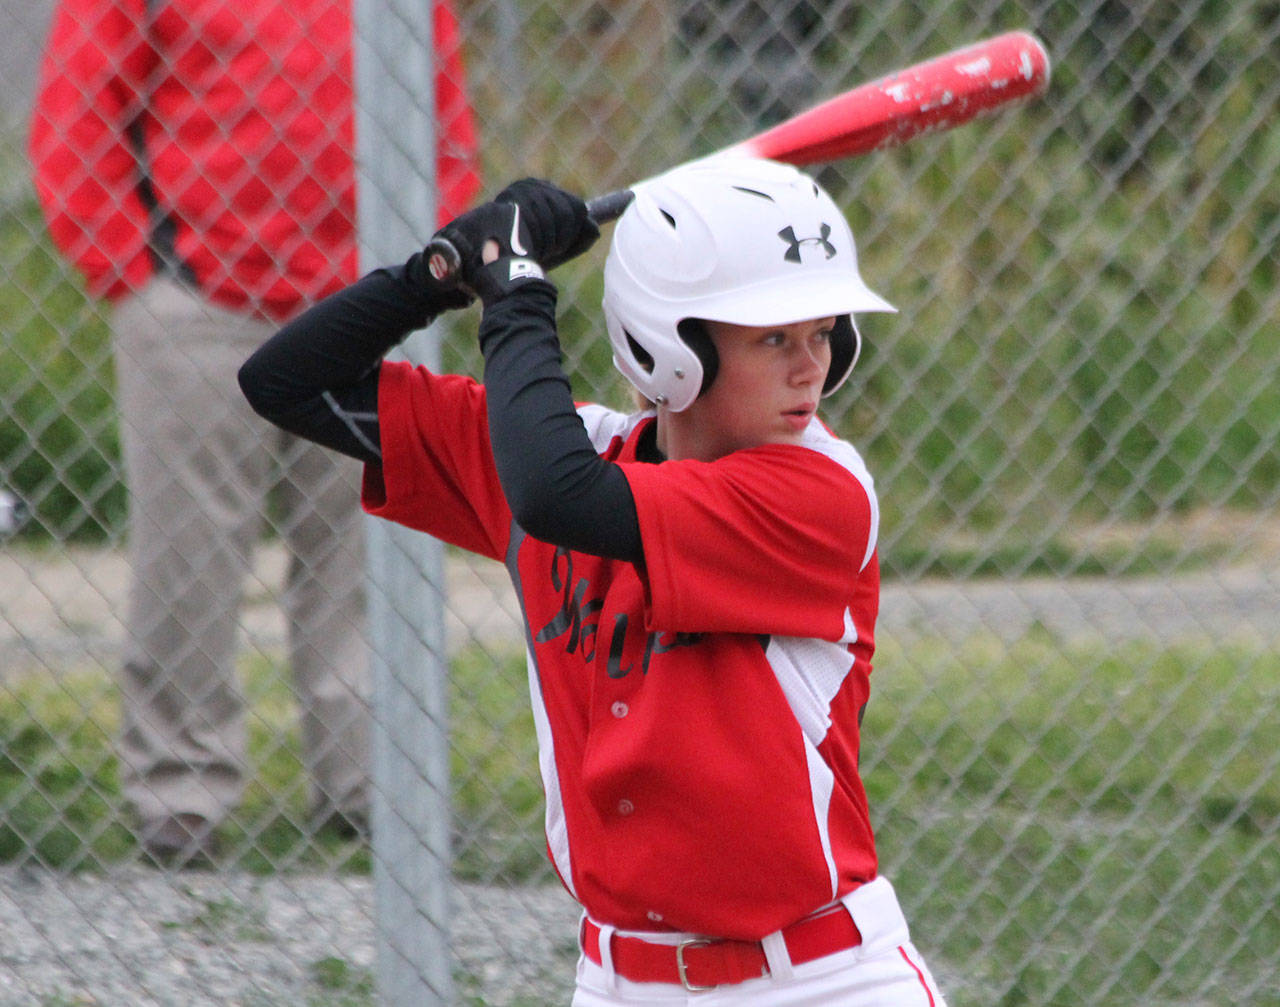 Chelsea Prescott focuses on the next pitch in a recent Babe Ruth game. (Photo by Jim Waller/Whidbey News-Times)